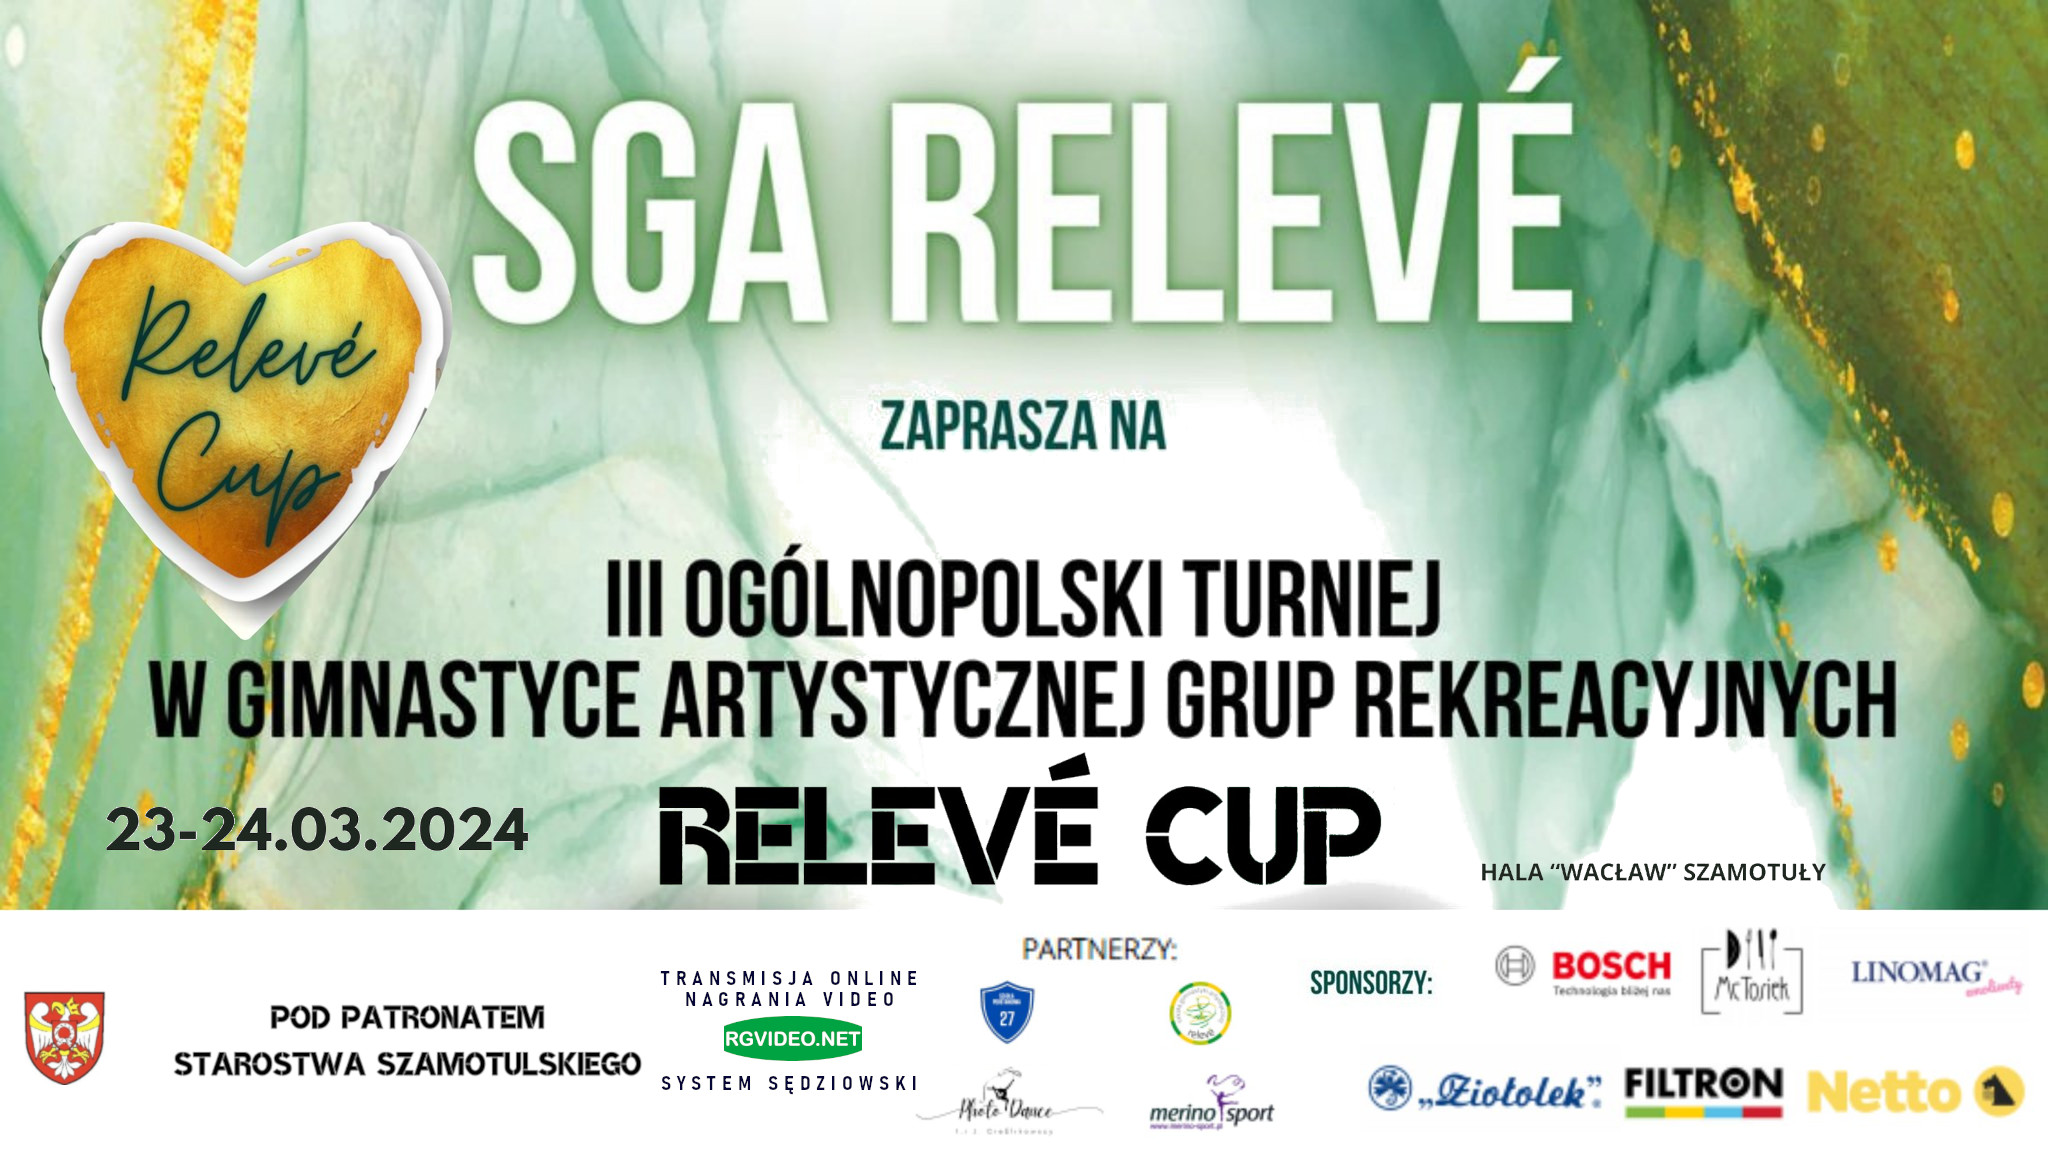 VIDEO - RELEVE CUP 2024